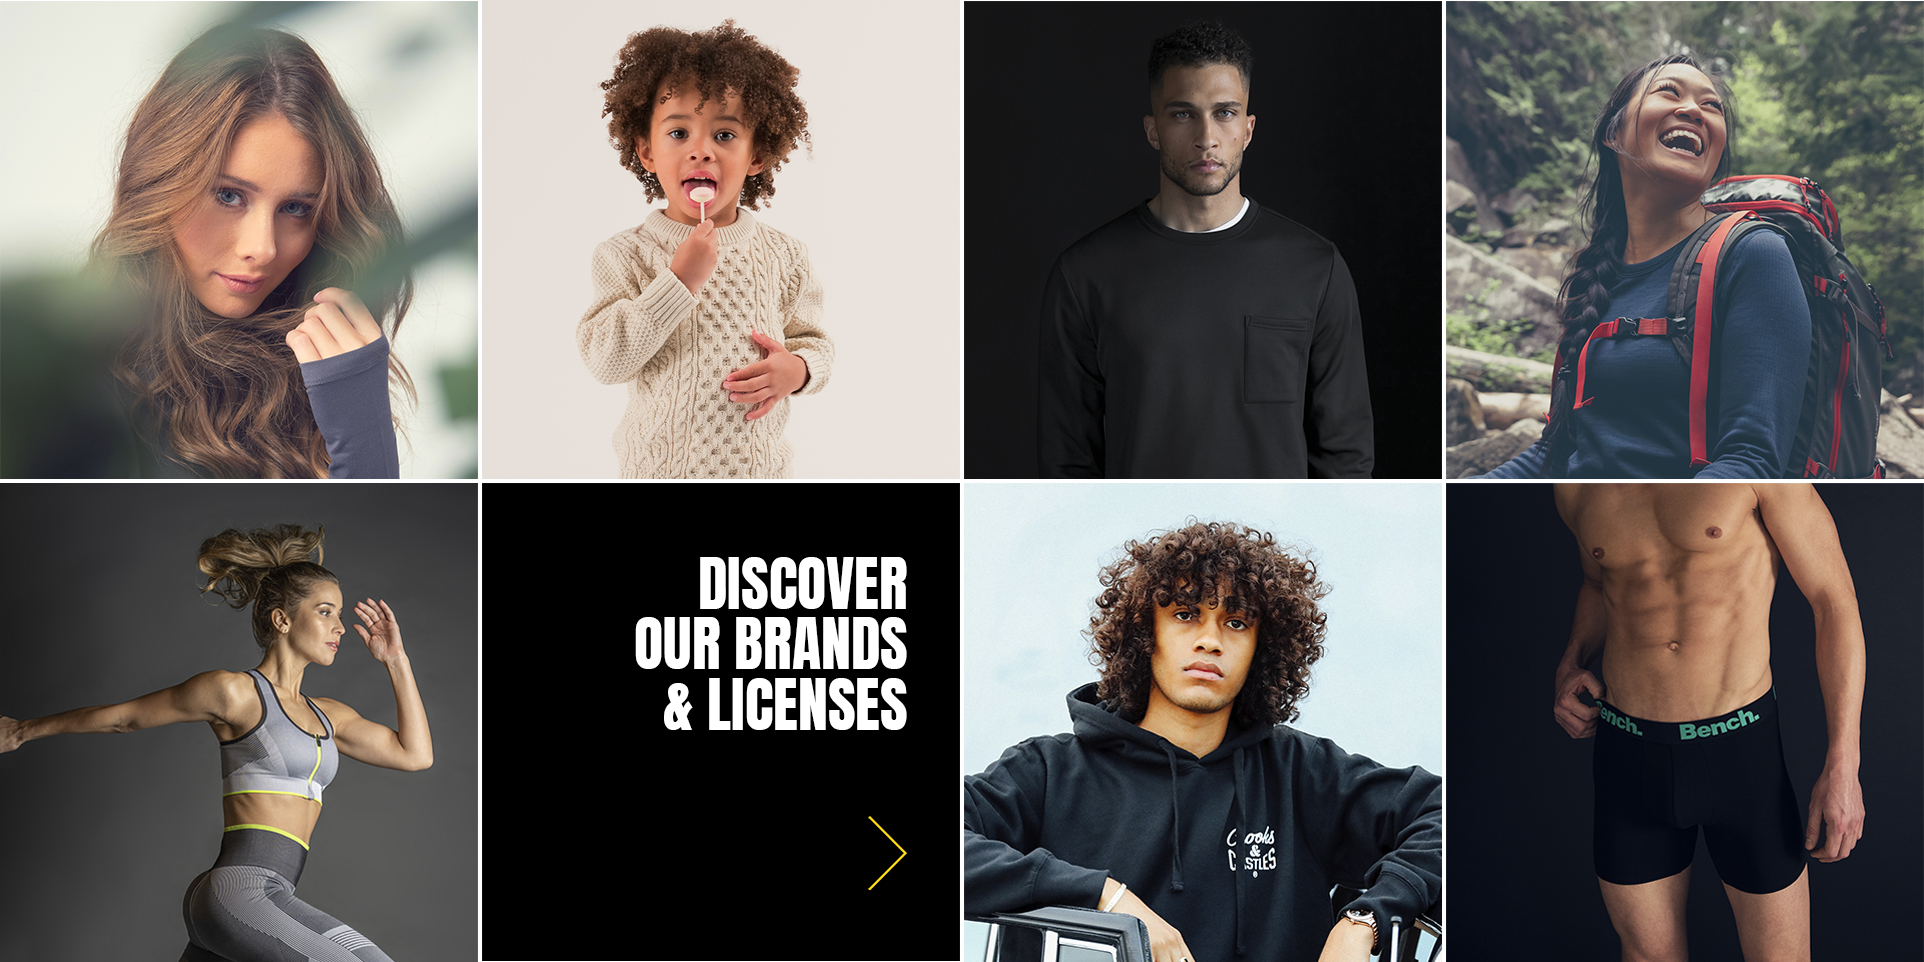 Discover our brands & licenses